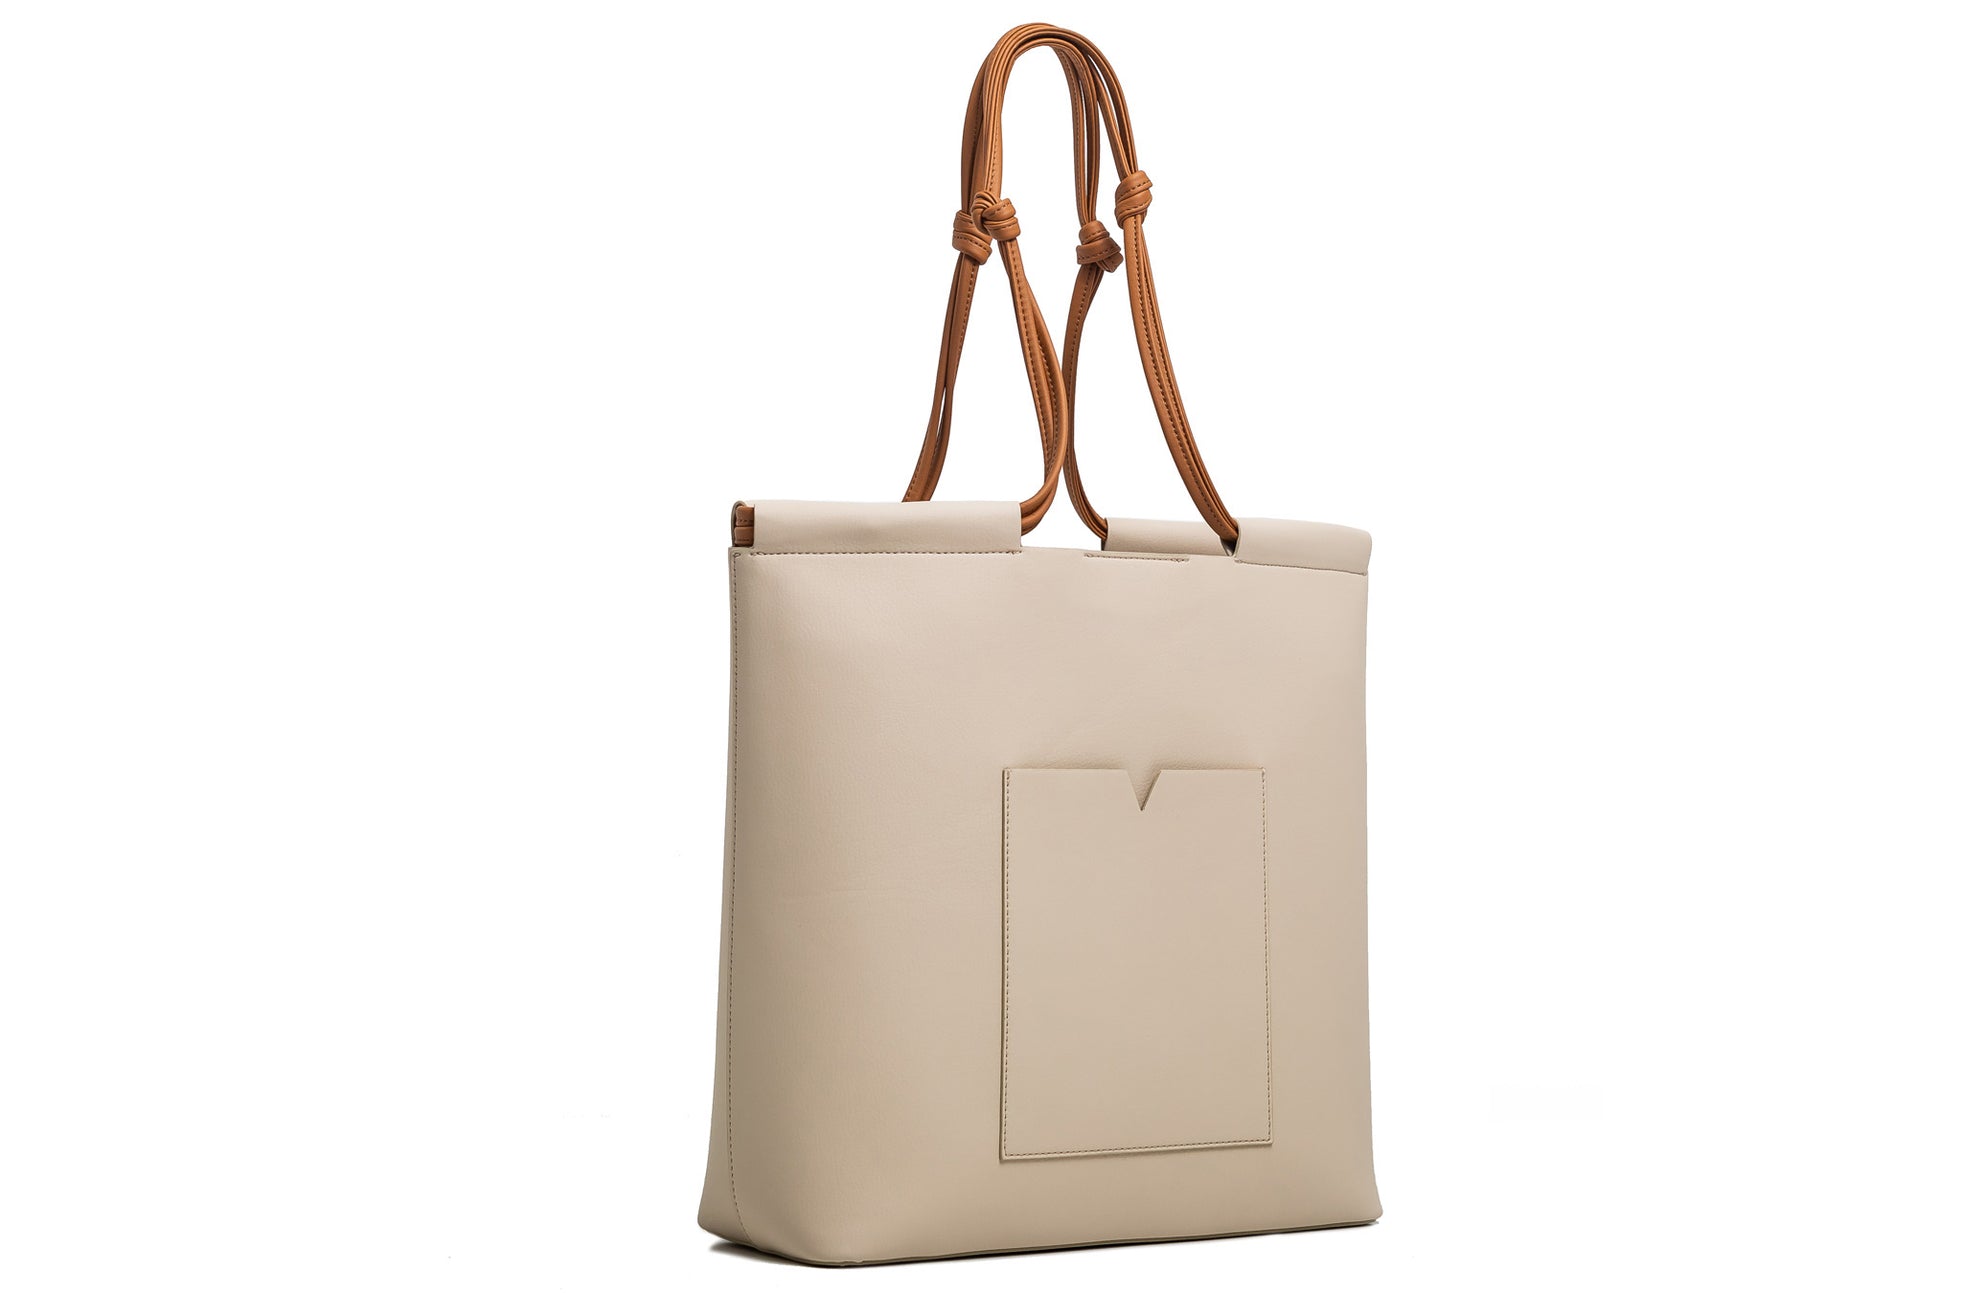 The Market Tote in Technik-Leather in Oat and Caramel image 